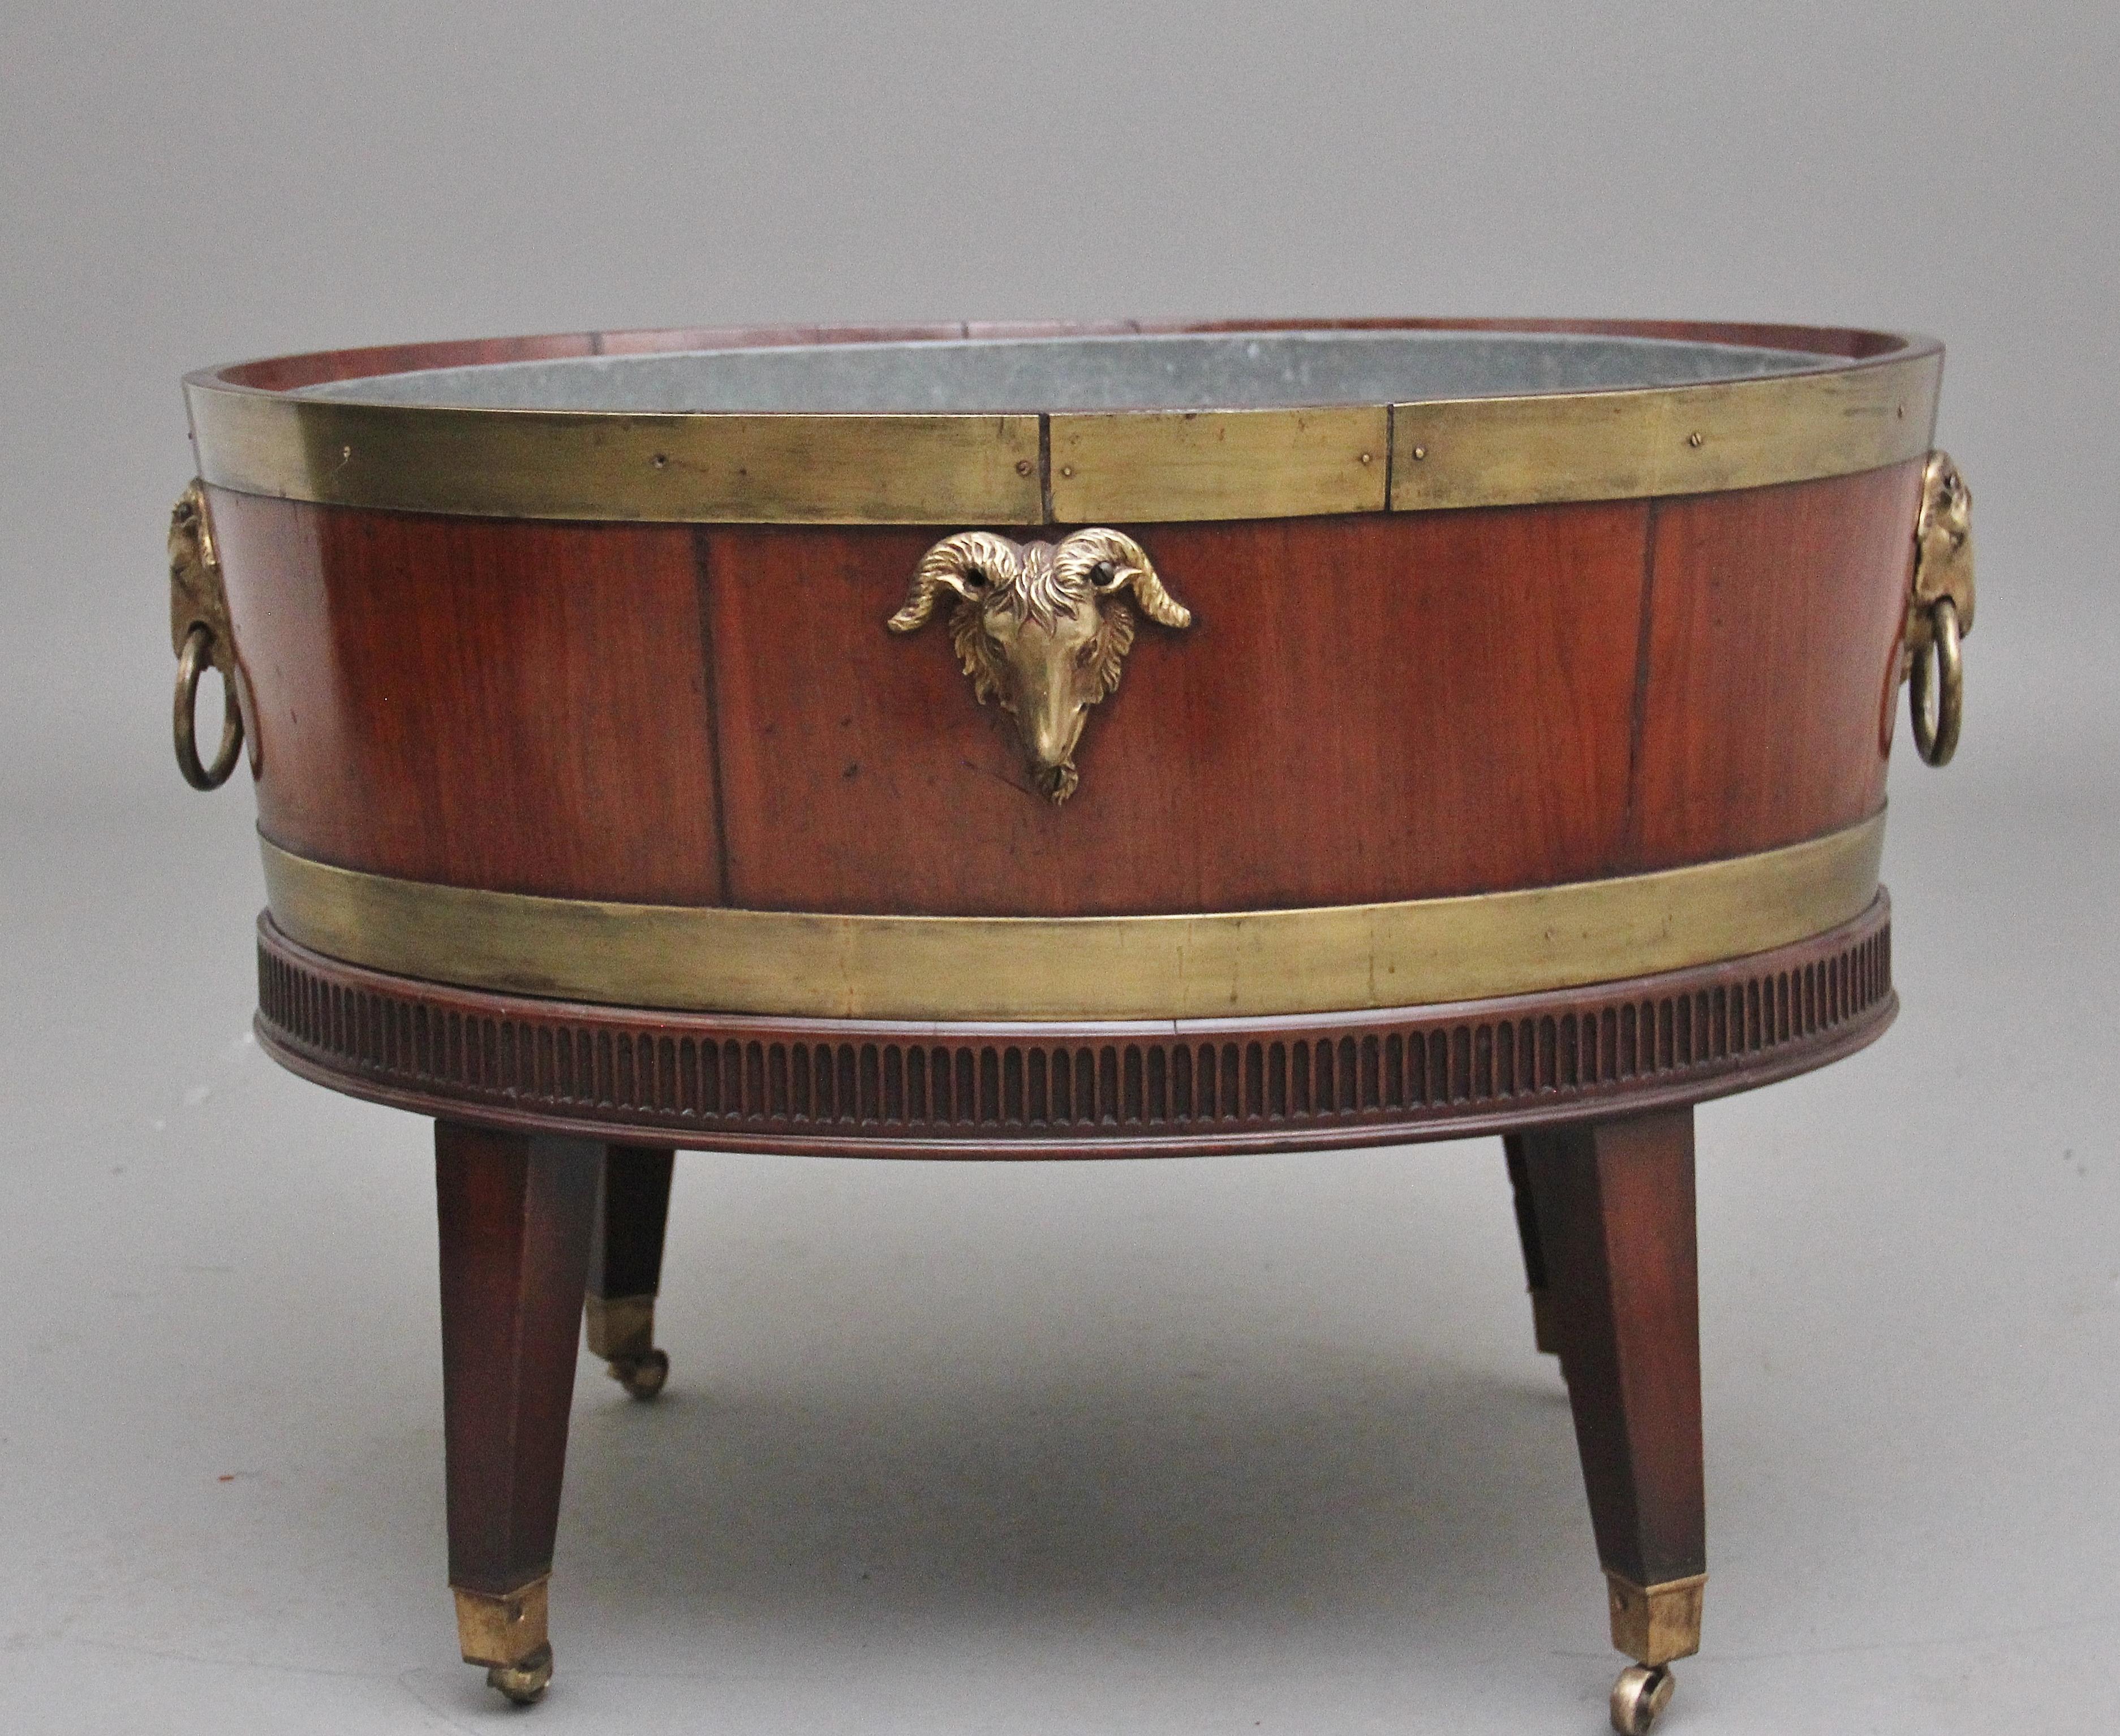 Highly Decorative Early 19th Century Mahogany and Brass Bound Wine Cooler For Sale 1